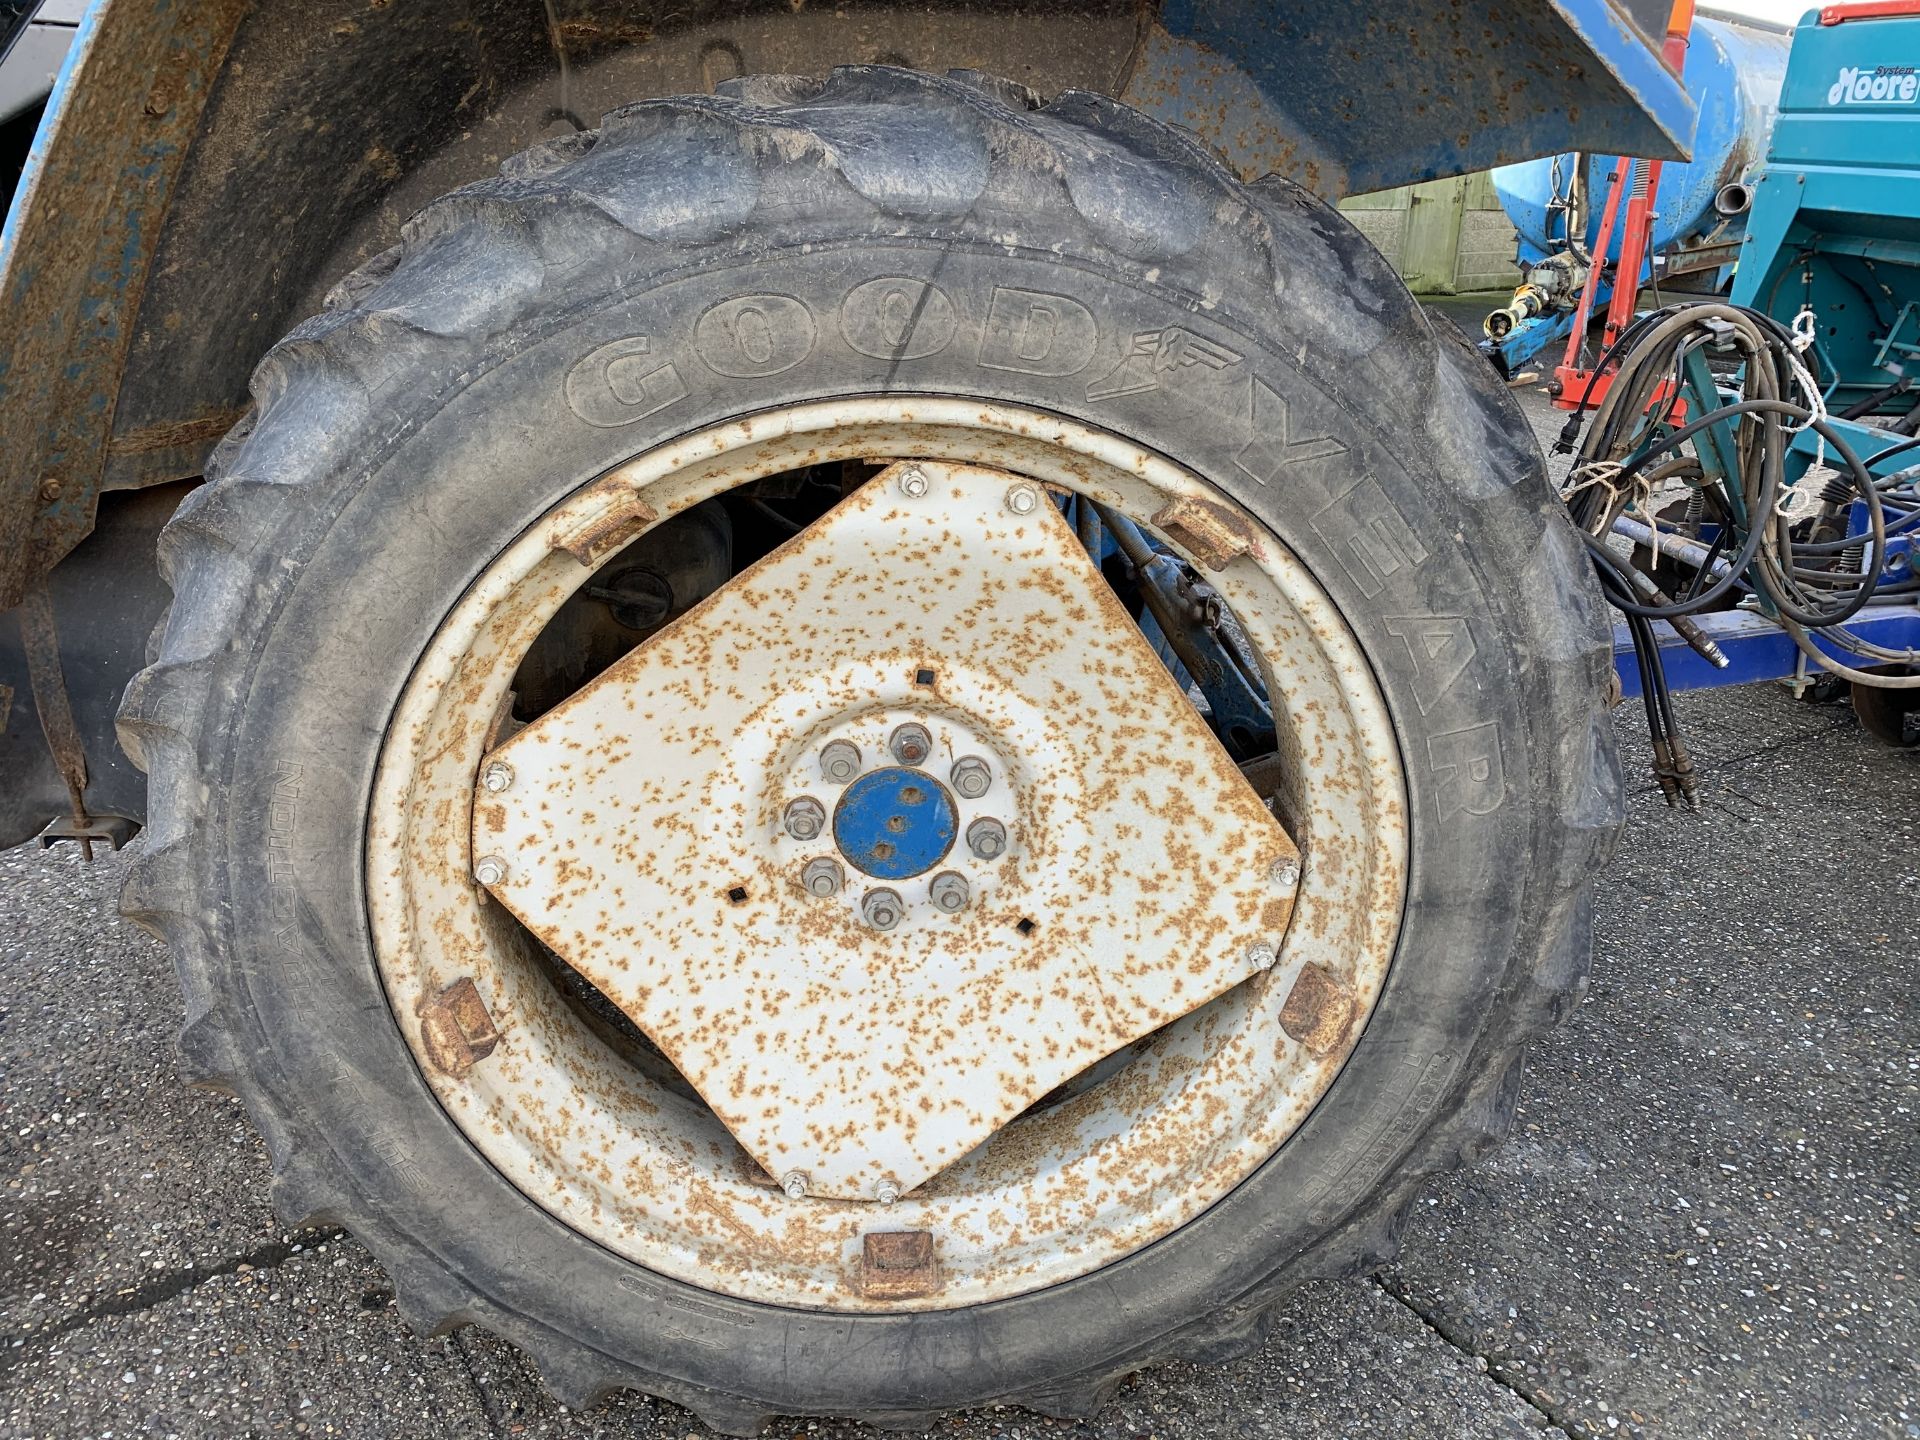 1993 Ford 7740 Powerstar SLE 2wd tractor L793 VKH, 4380 hours, 13.6R38 rear tyres with 60% tread, - Image 3 of 8